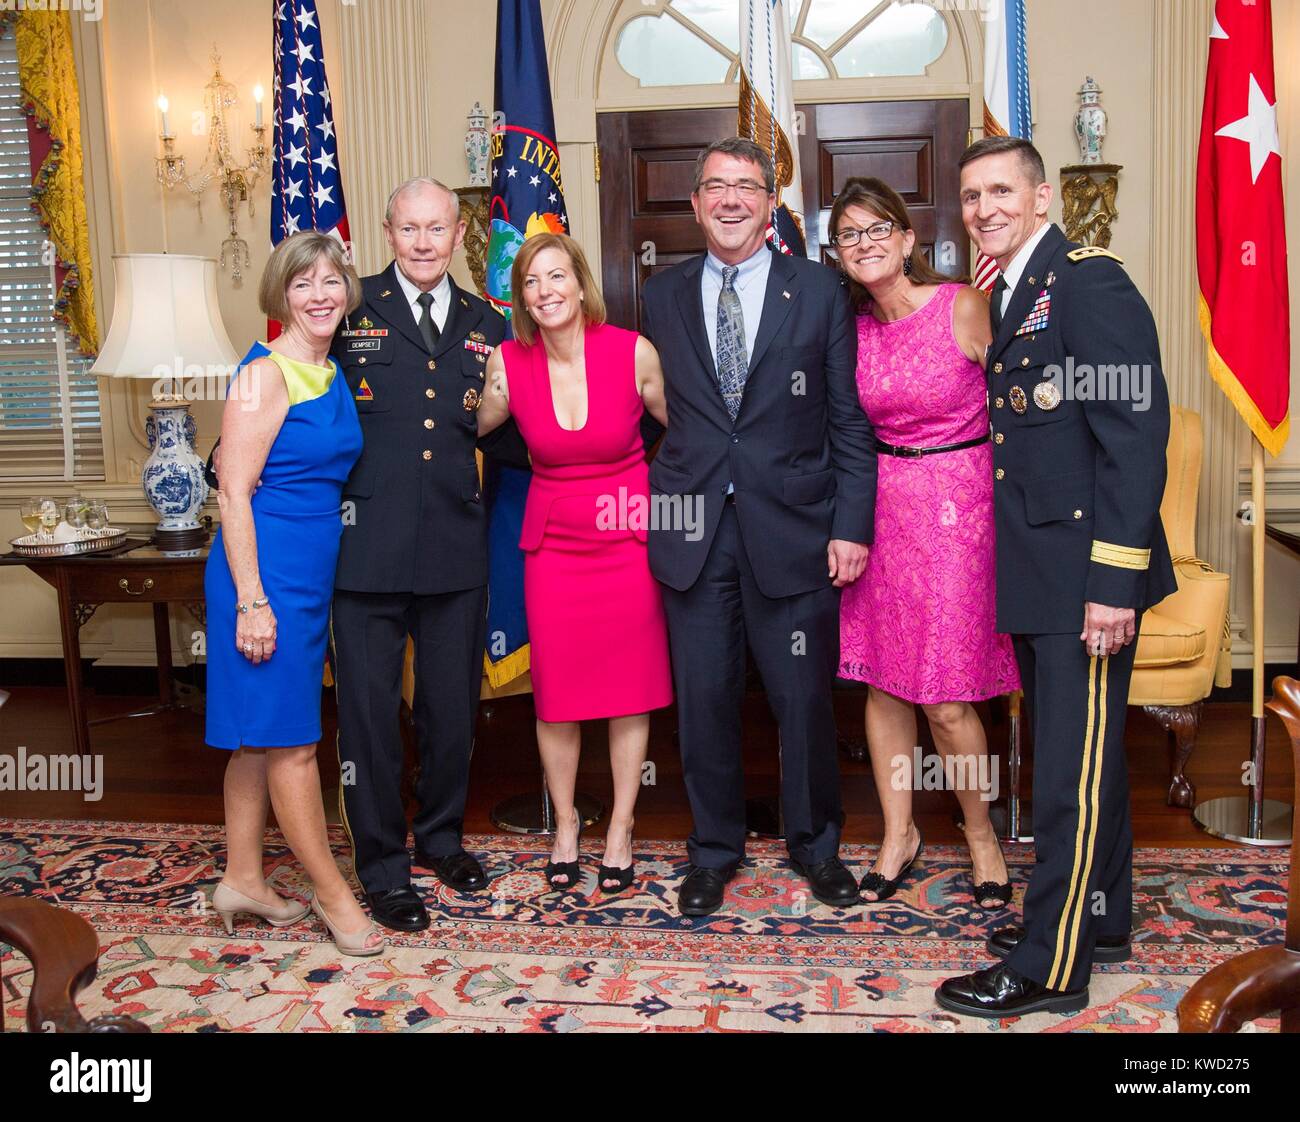 Happy chief defenders of the US with their wives at a reception on June 11, 2013. At the State Dept. event, foreign defense attaches met US Department of Defense leadership. L-R: Deanie Dempsey; Gen. Martin Dempsey, Chrm. Joint Chiefs; Stephanie Carter; Ash Carter, Deputy Sec. Defense; Lori Flynn; Dir. Defense Intelligence Agency, Gen. Michael Flynn  (BSLOC 2017 20 191) Stock Photo